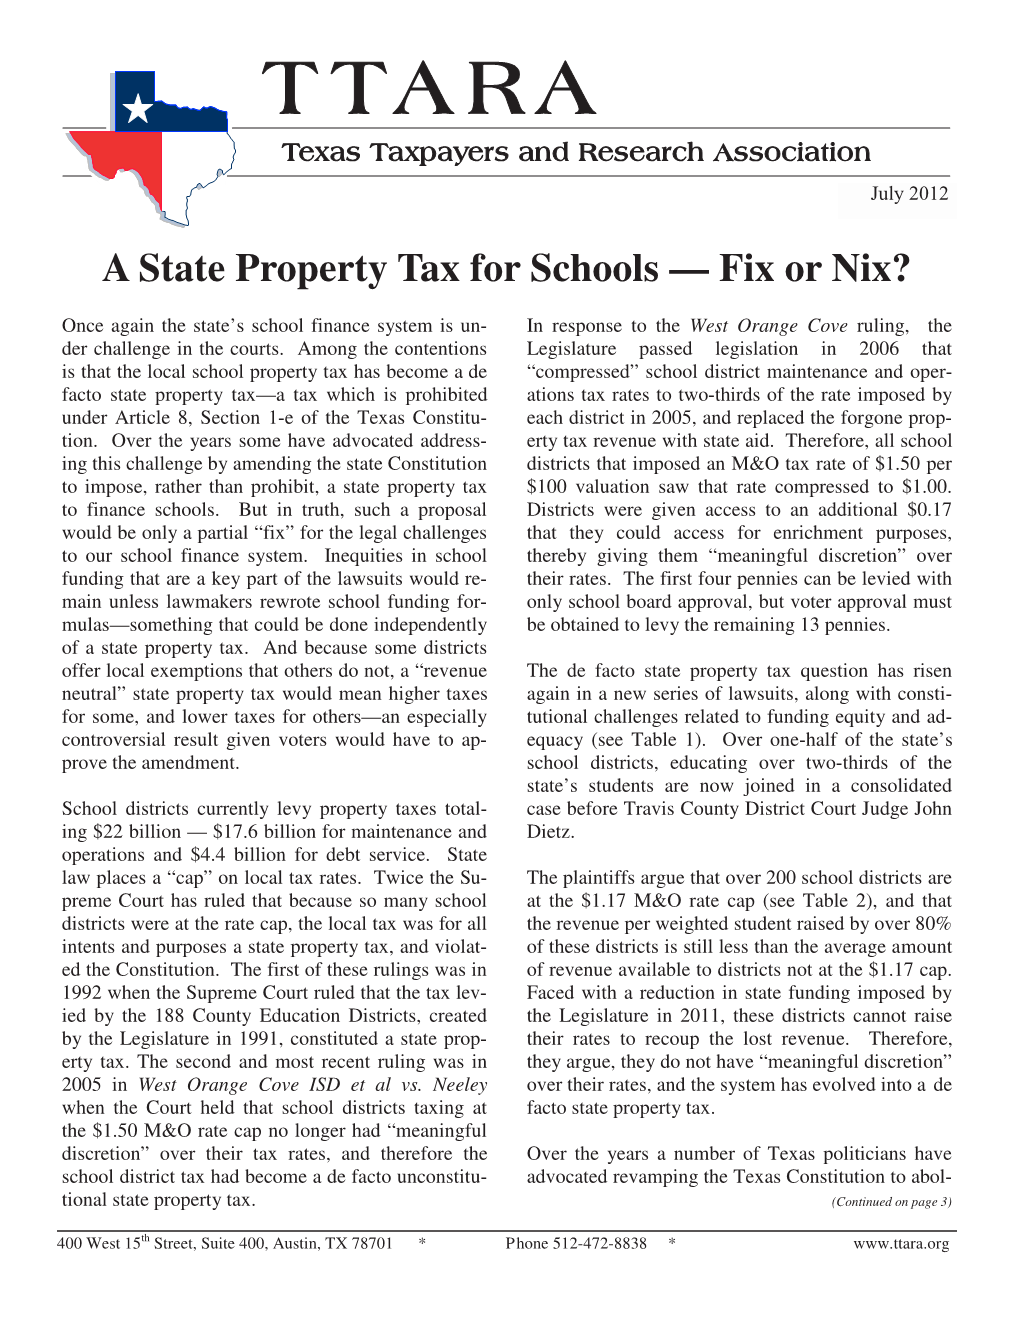 A State Property Tax for Schools — Fix Or Nix?